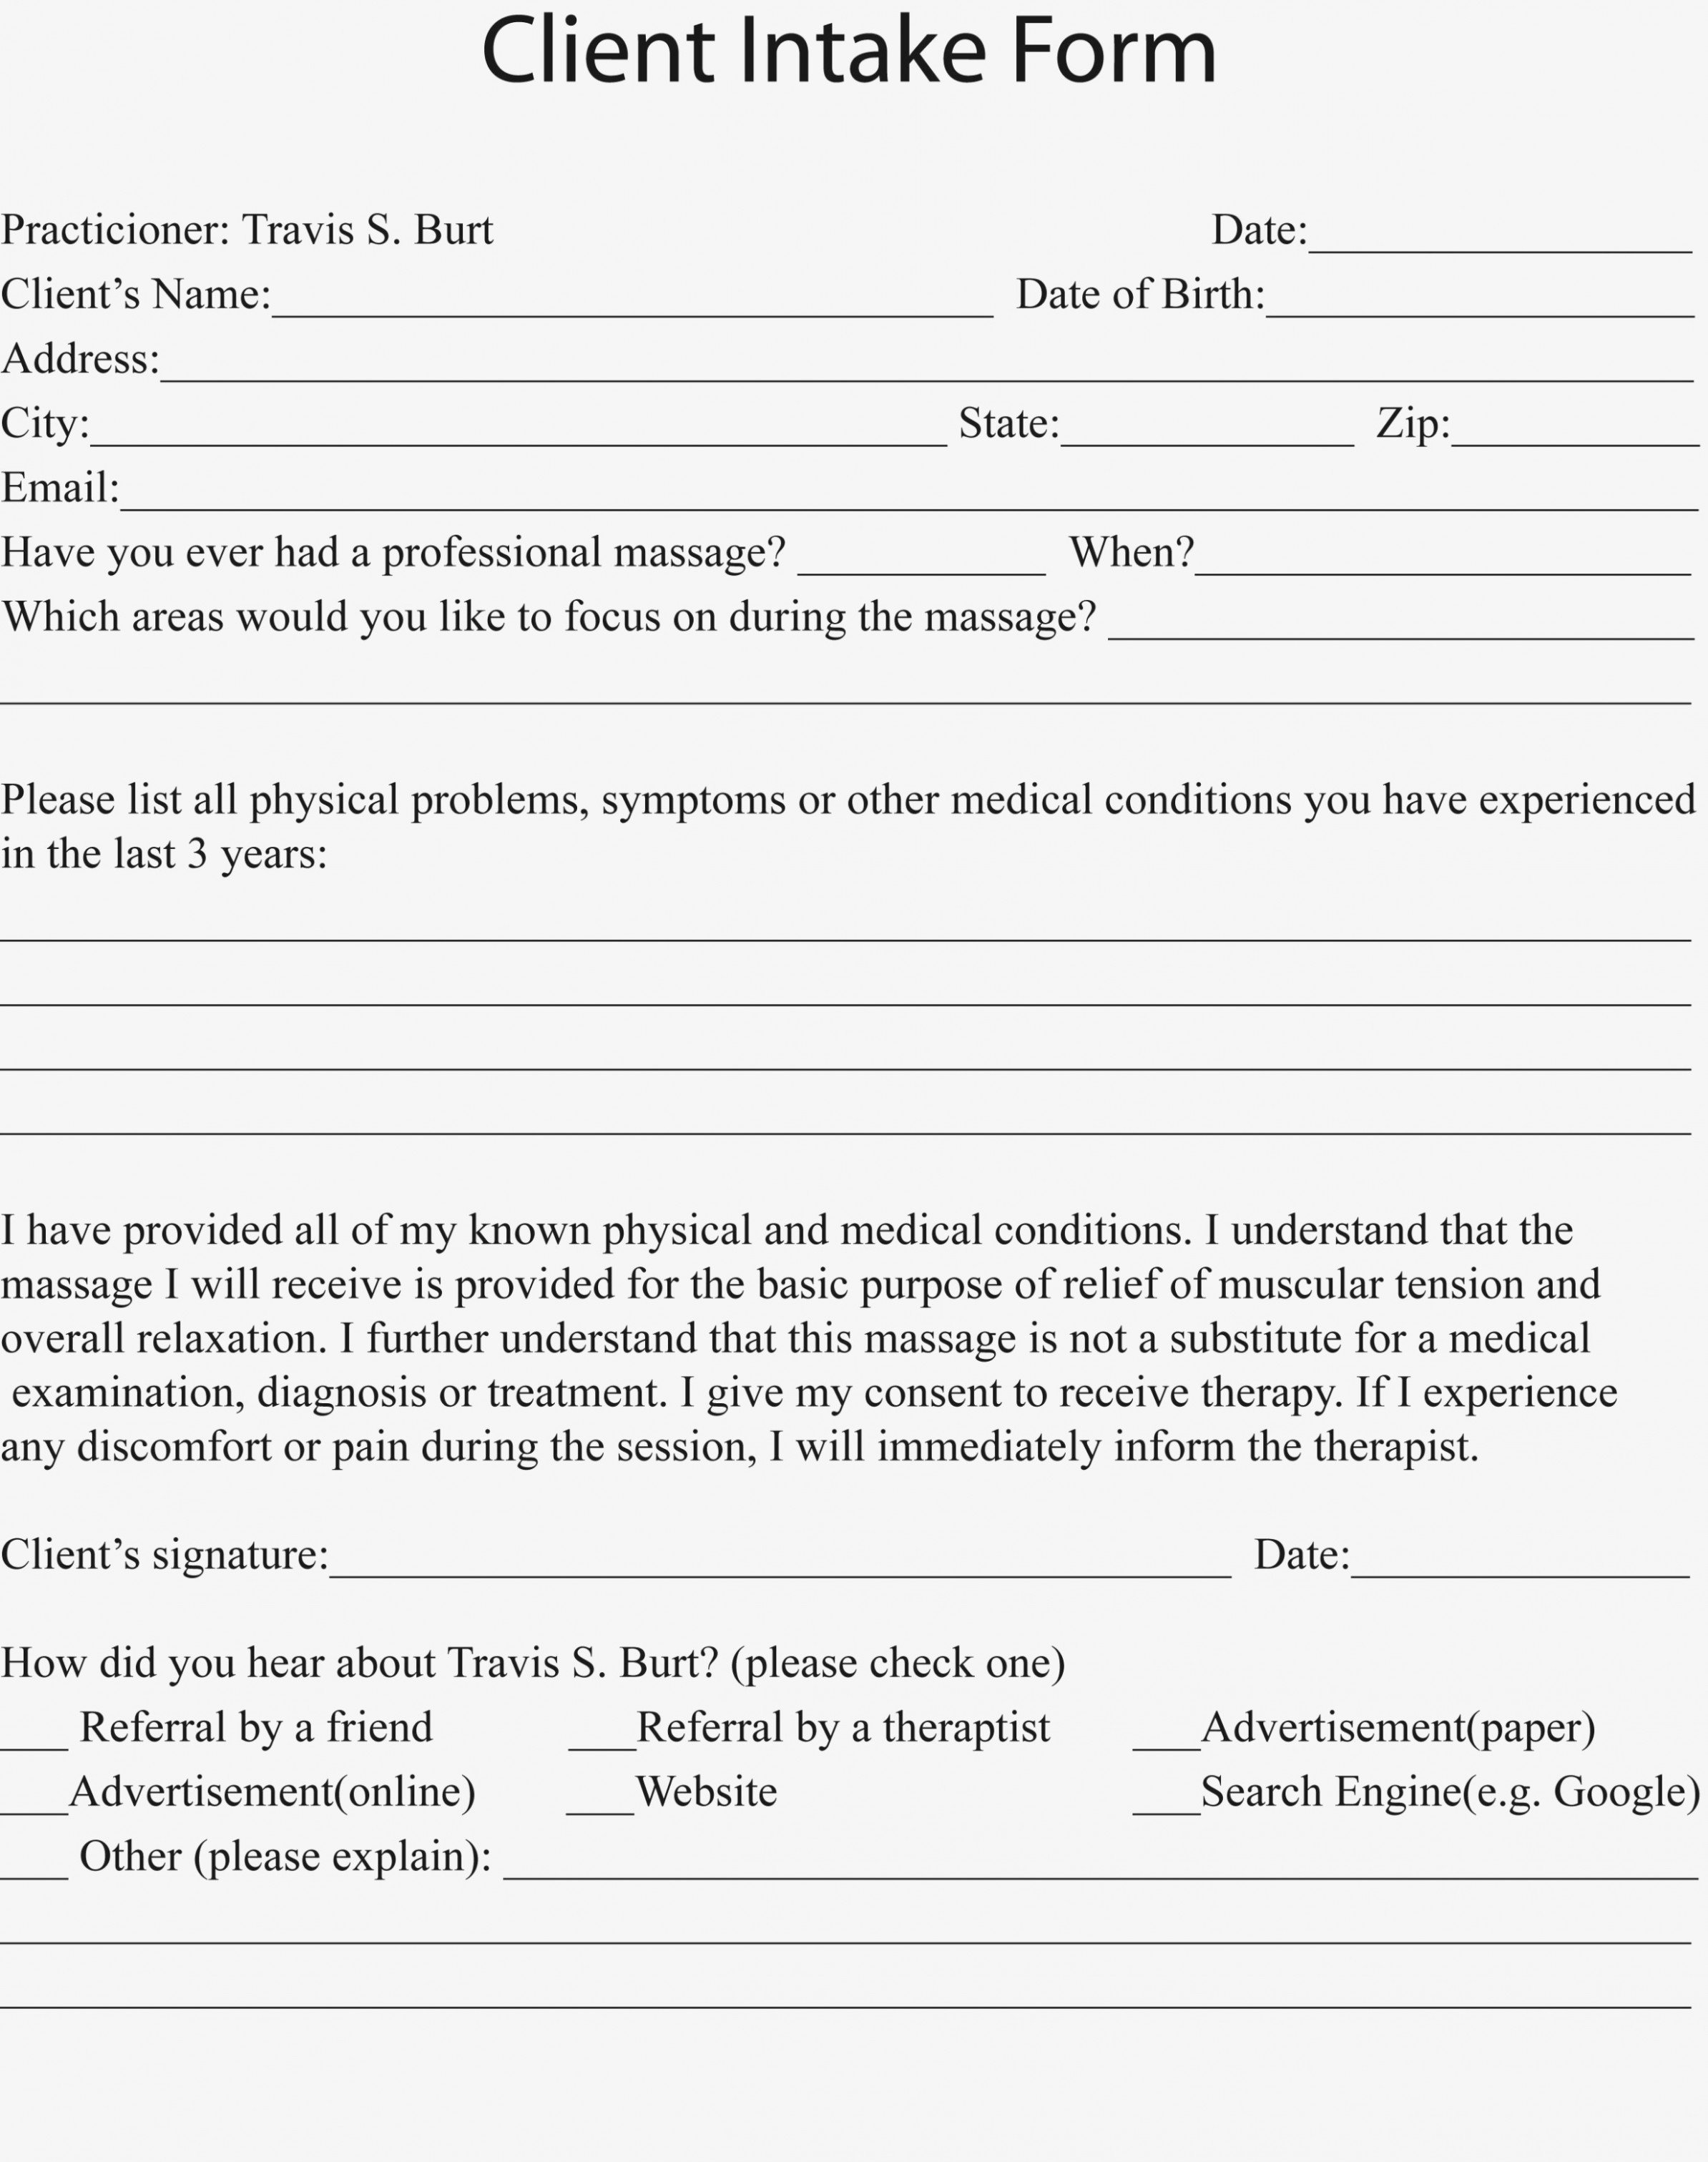 Massage Intake form Template Awesome How to Leave Client Intake